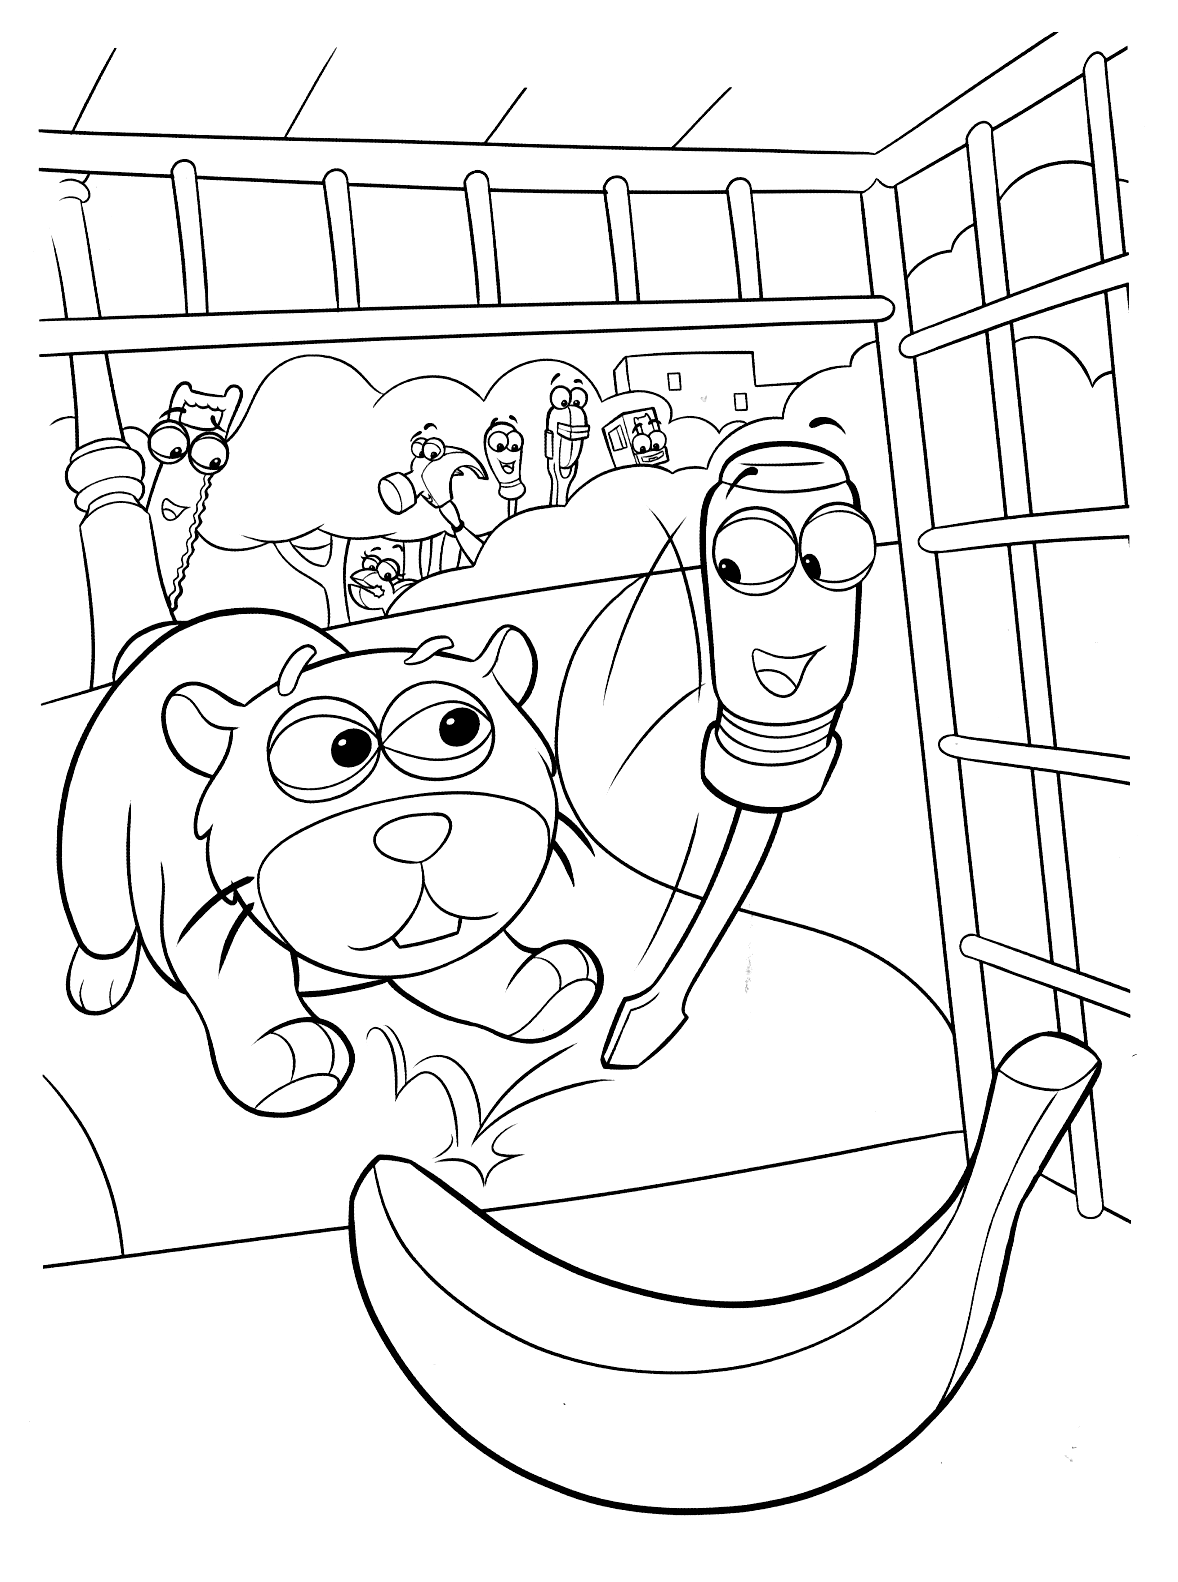 Coloring page - An animal